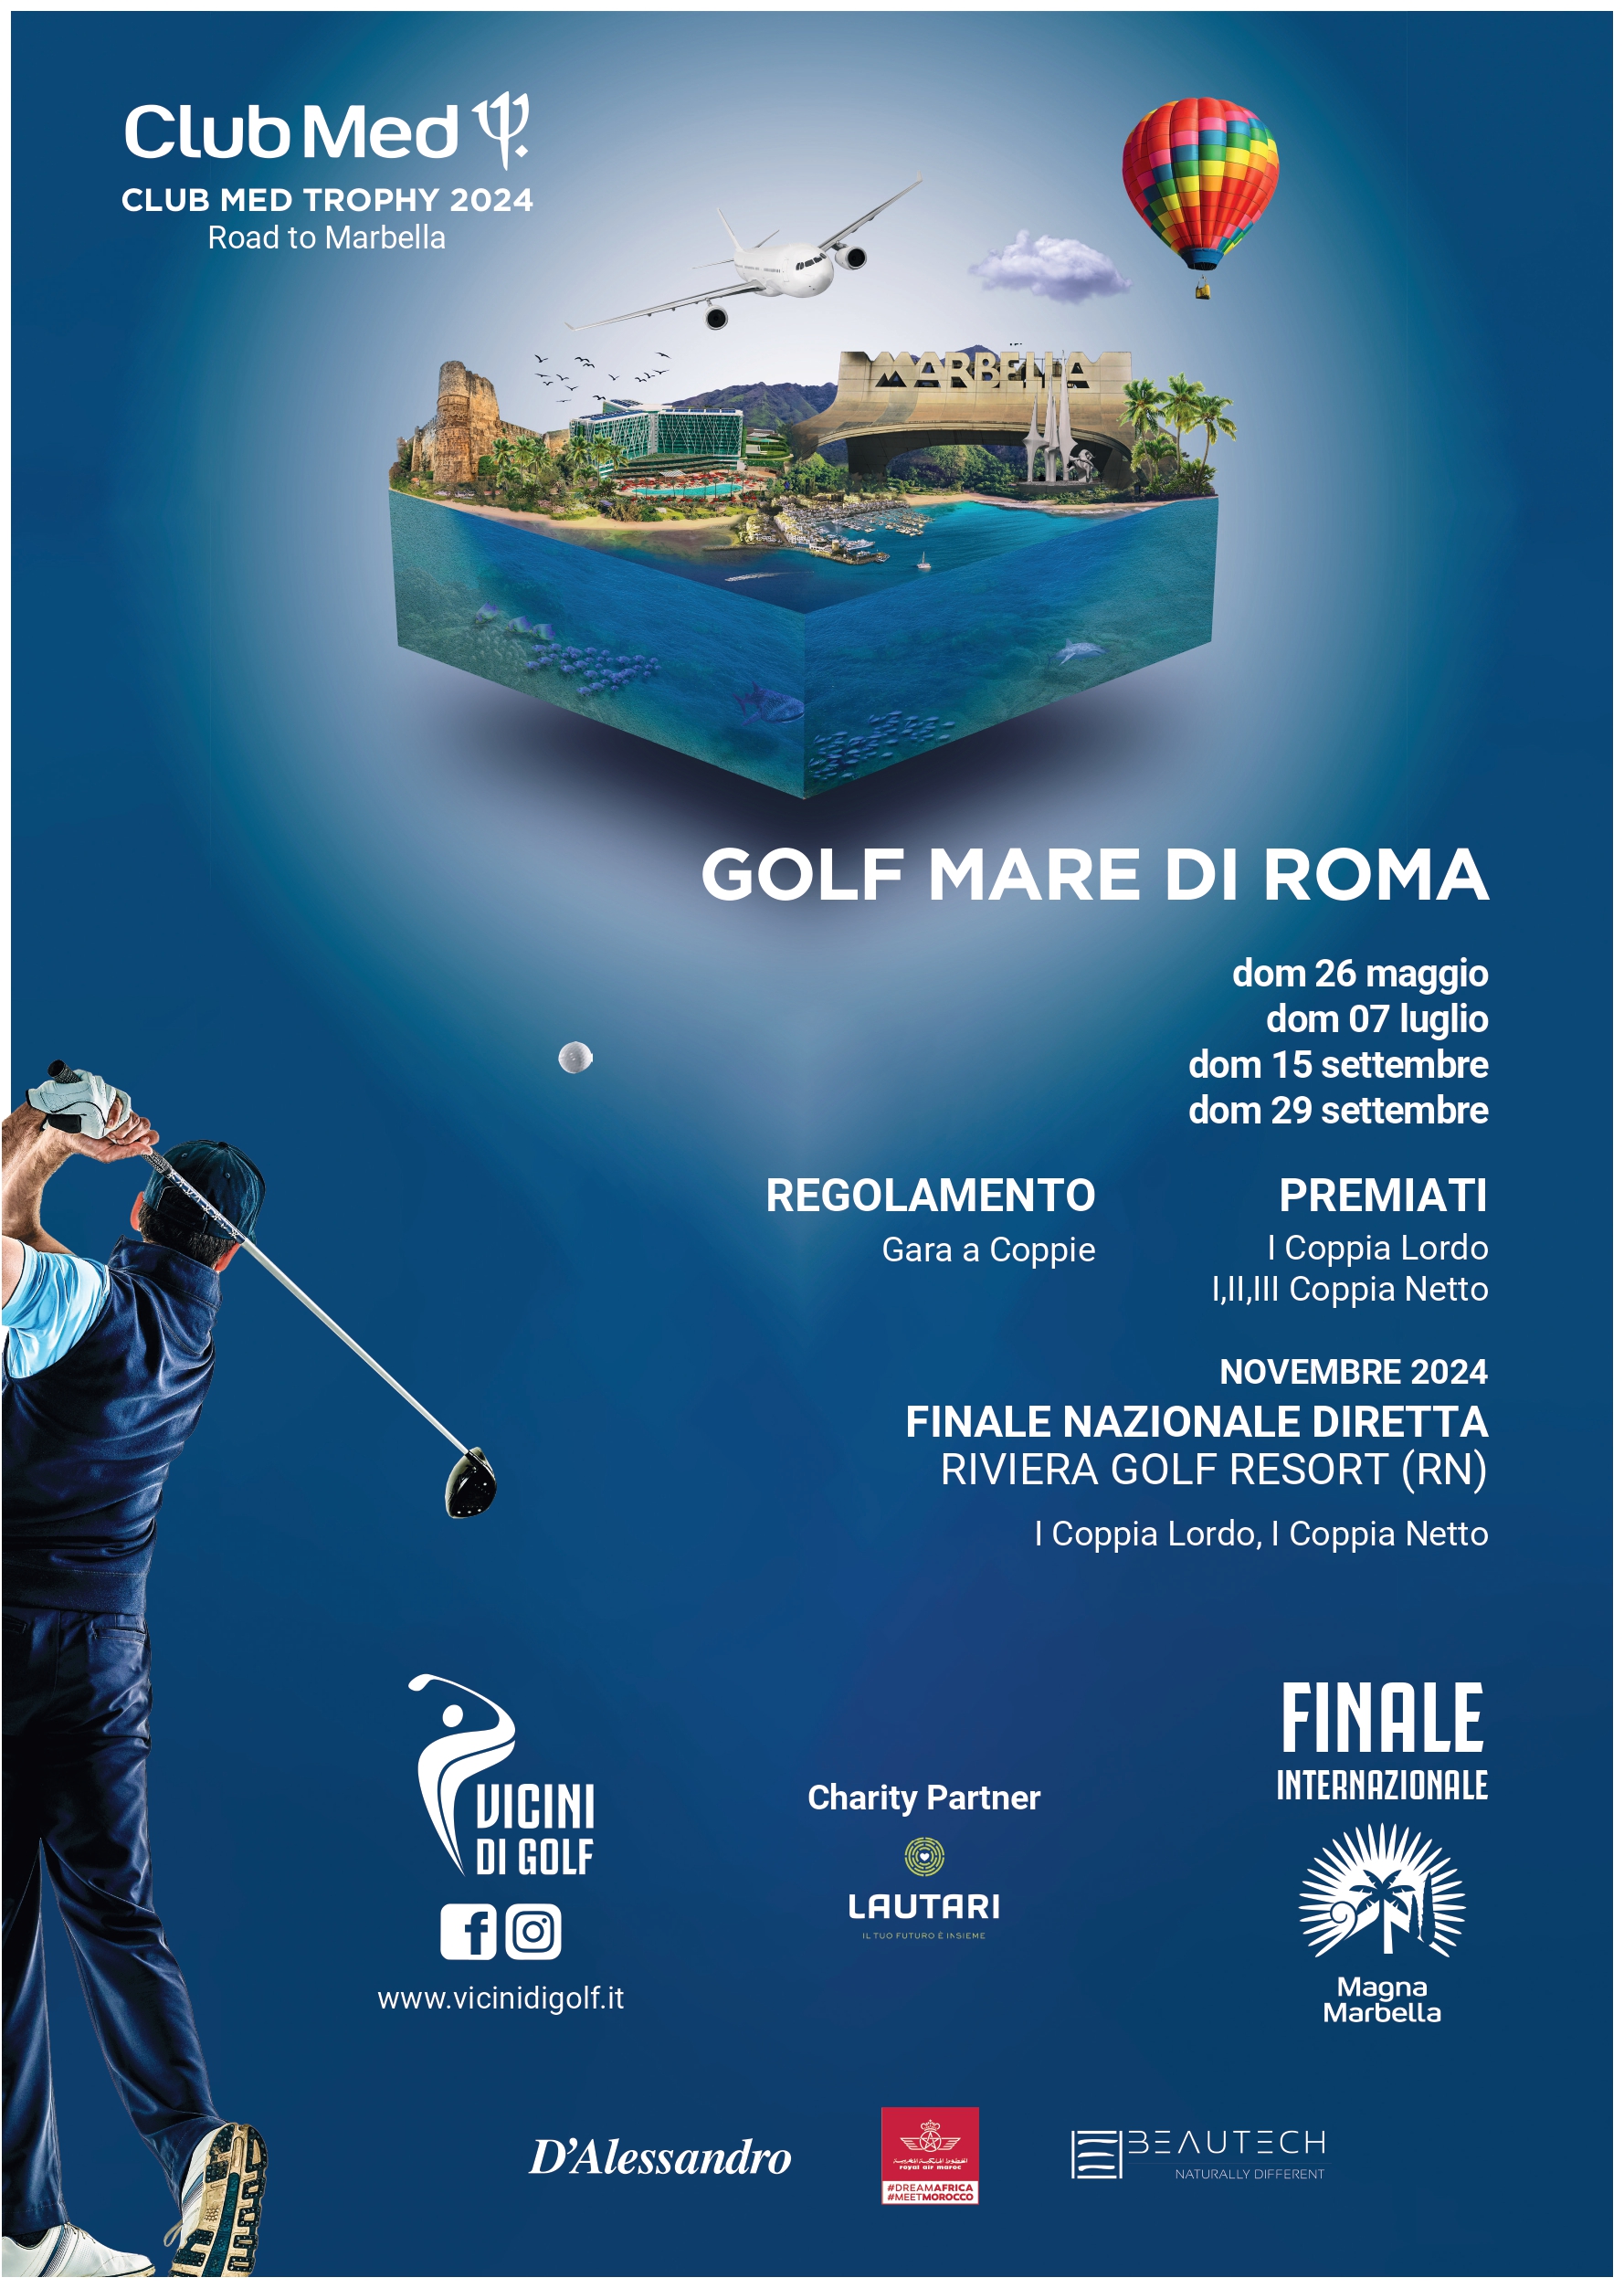 Ultimissima Tappa Club Med Trophy 2024 Road to Marbella by Arte&Golf.